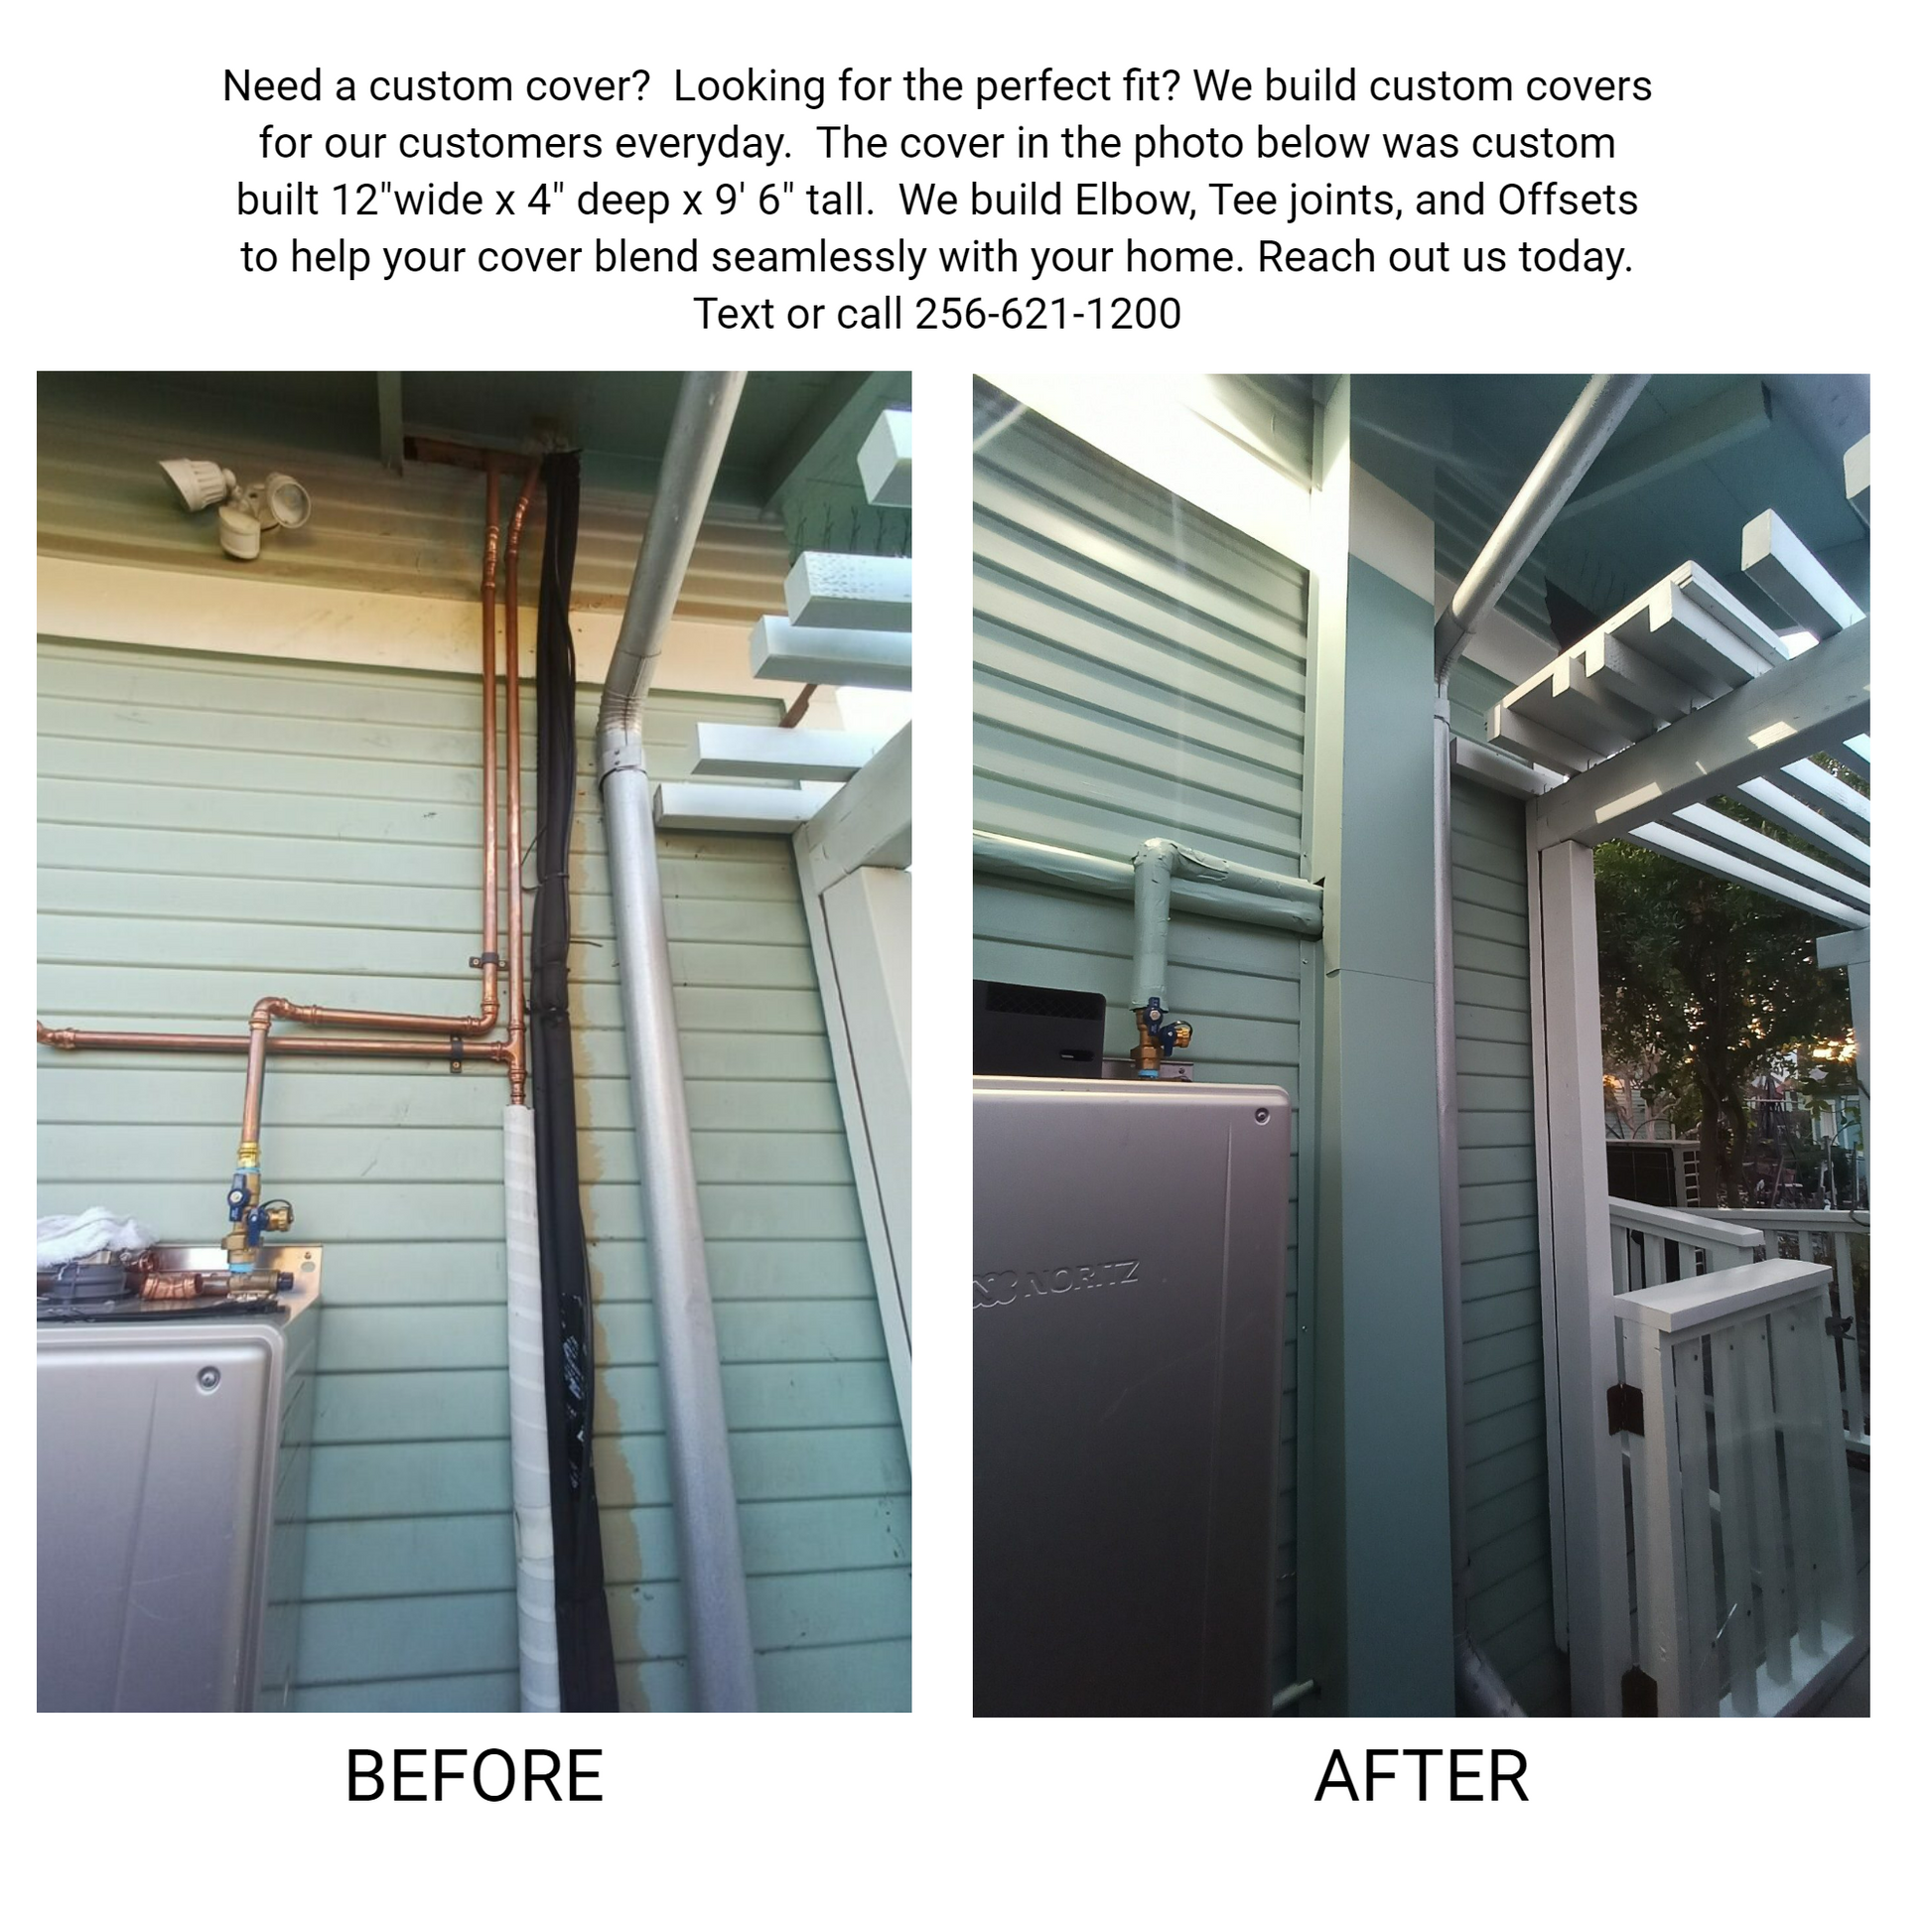 Two images illustrate a pipe installation on a house exterior, with text above explaining the service. The left image (BEFORE) shows an exposed pipe, while the right image (AFTER) displays the pipe neatly covered by Residential Series - Copper Metal HVAC Line Set Covers - Pure Copper from Perma Cover. A contact number is provided for this professional service.